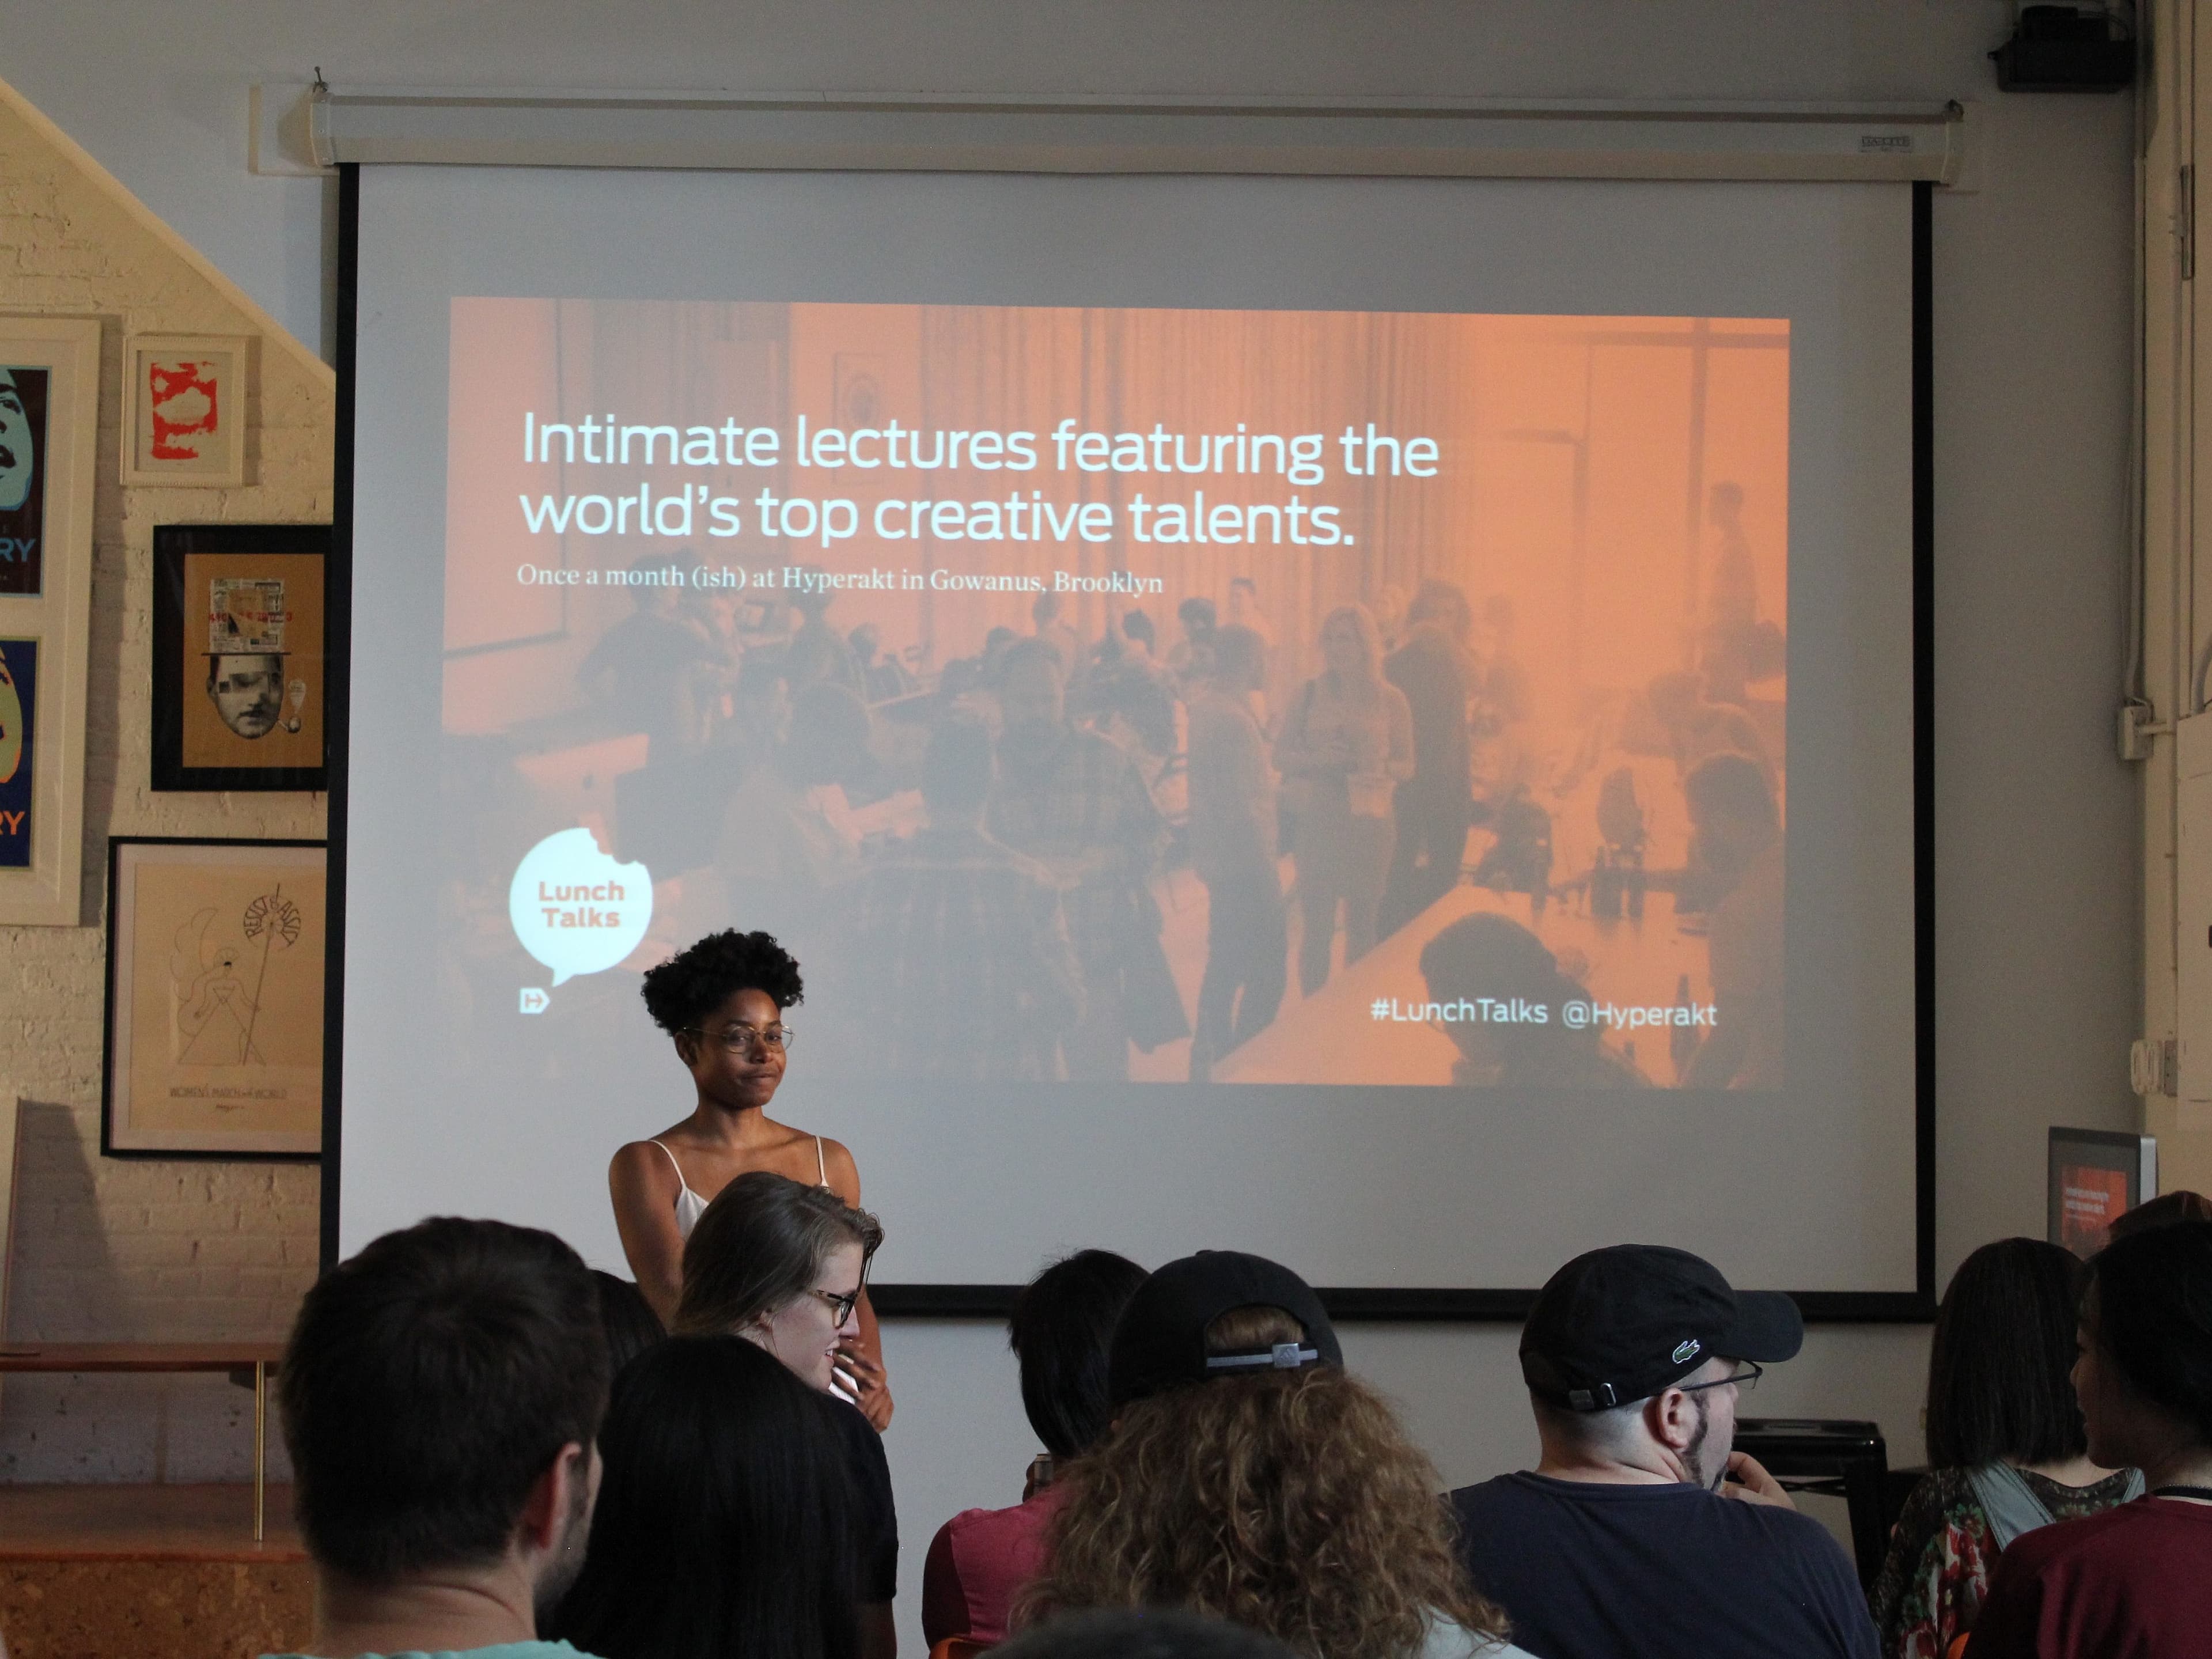 A woman stands in front of a crowd in a room, speaking at an event. Behind her, a screen displays a presentation titled "Intimate lectures featuring the world's top creative talents." The audience is seated and attentively watching the speaker.